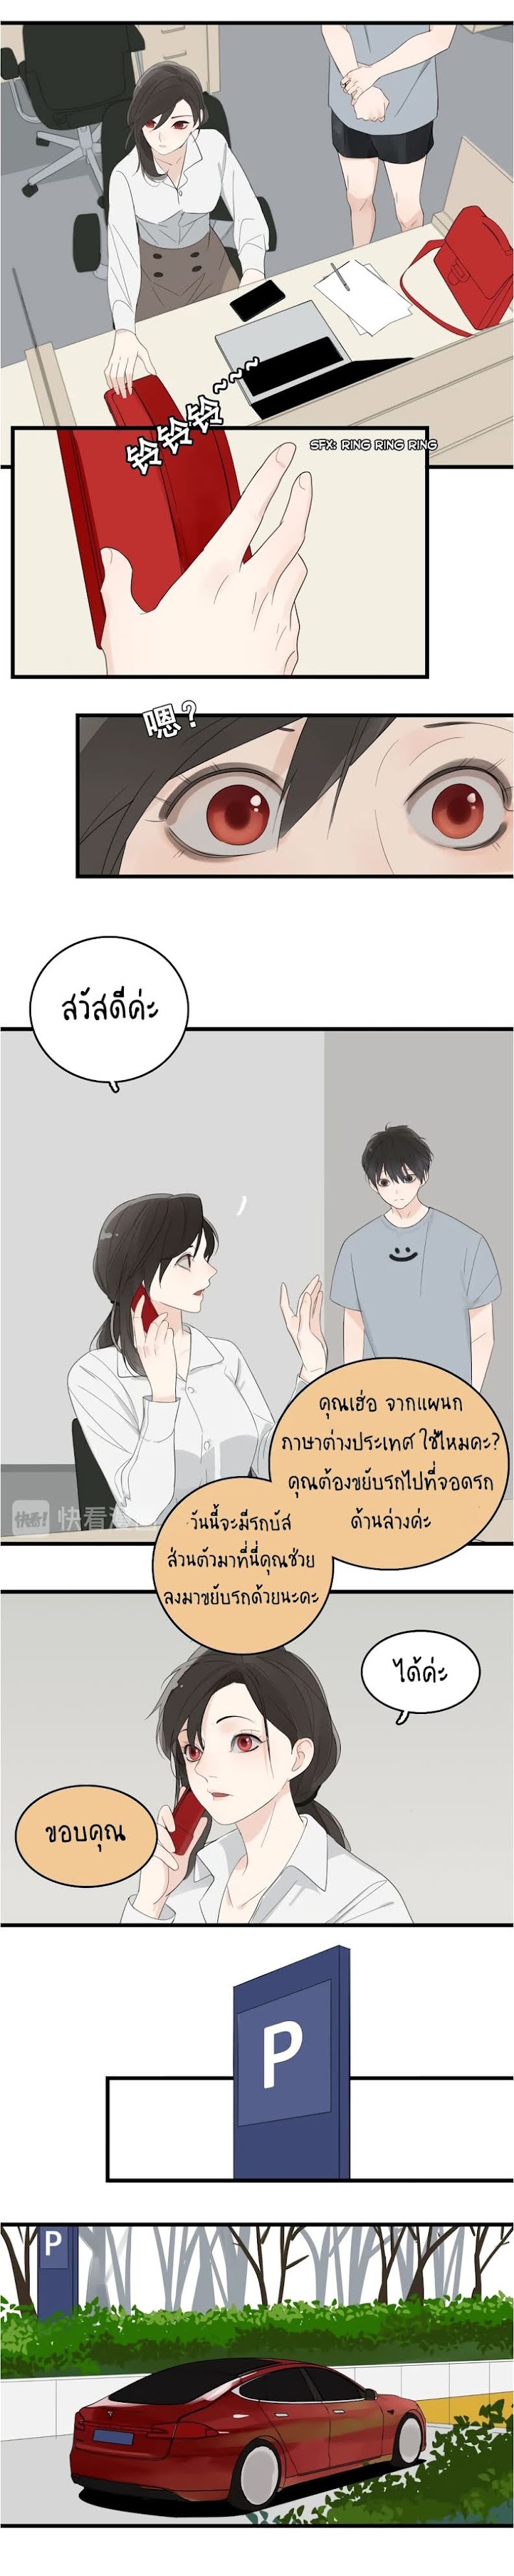 Who Is the Prey - หน้า 13